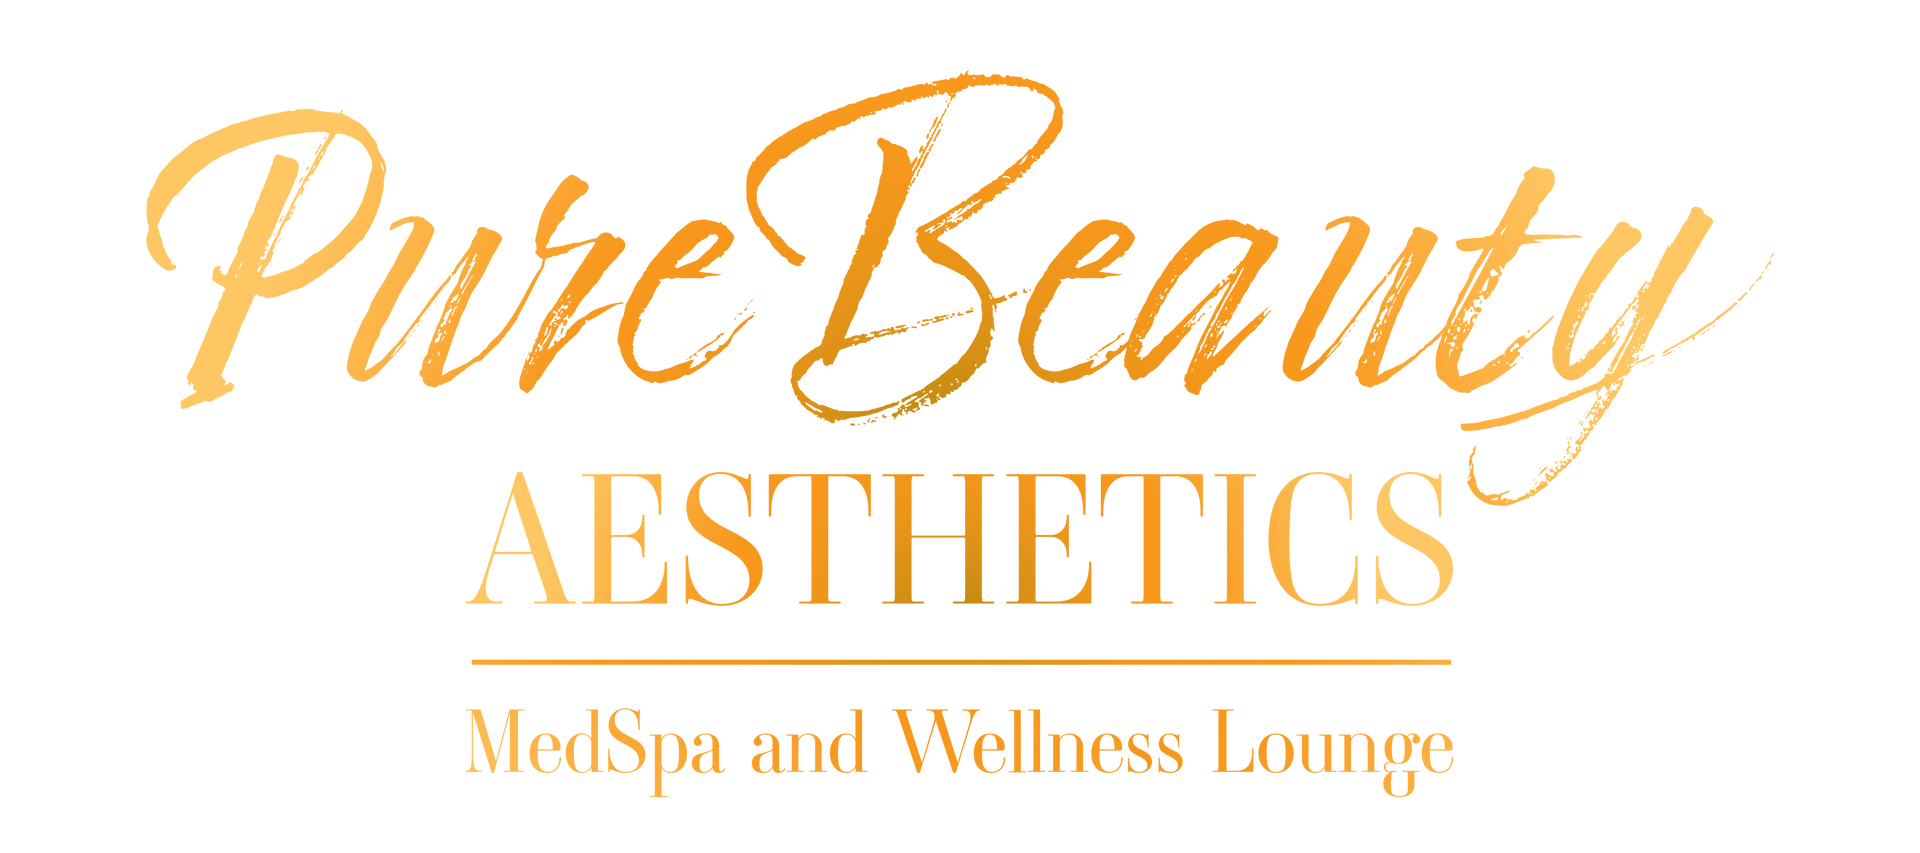 A black and gold logo for pure beauty aesthetics